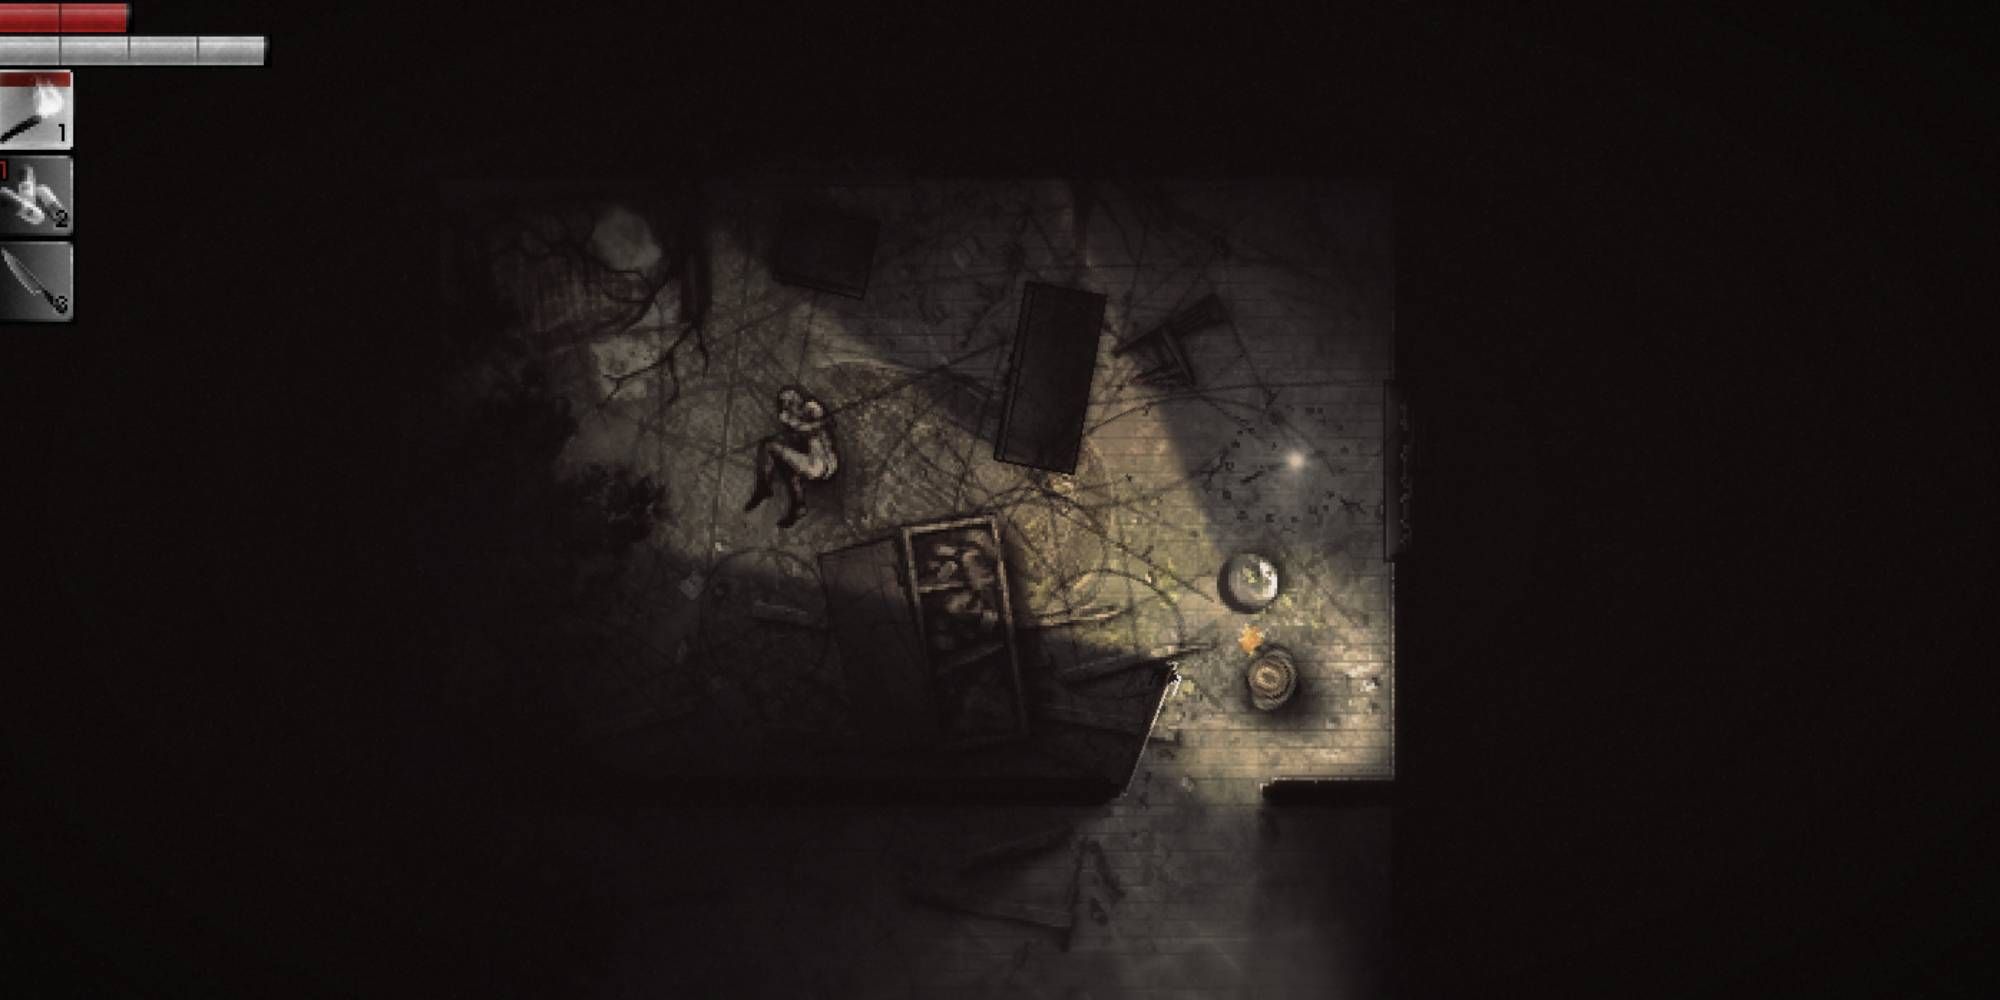 The player's in game view within a dark room that contains some overturned furniture, lit only by a handheld light